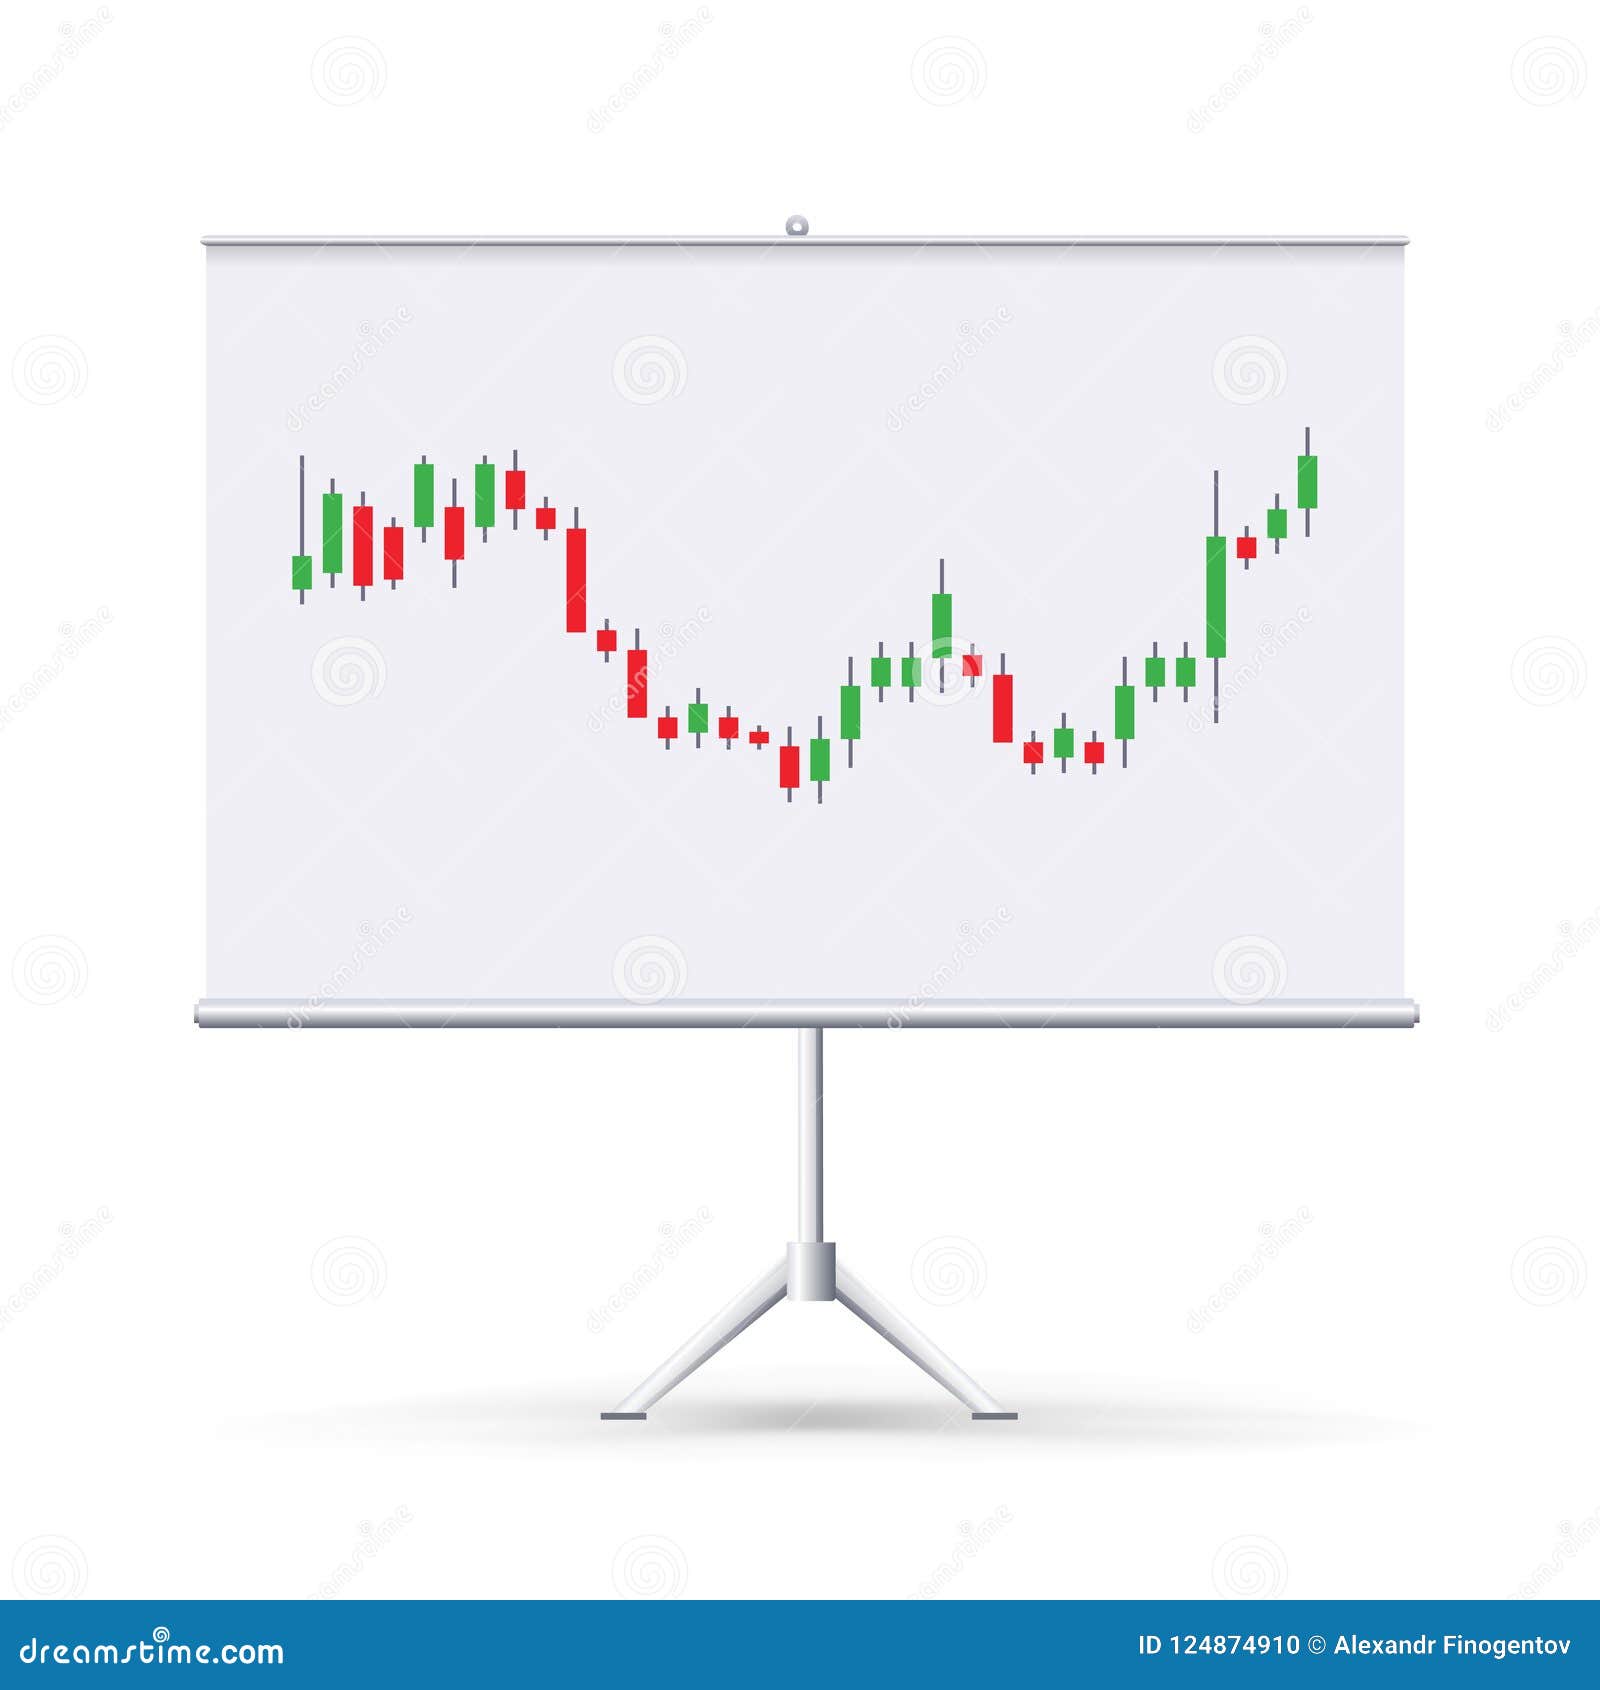 Realistic Blank Flipchart With Japanese Candles Isolated On White - 